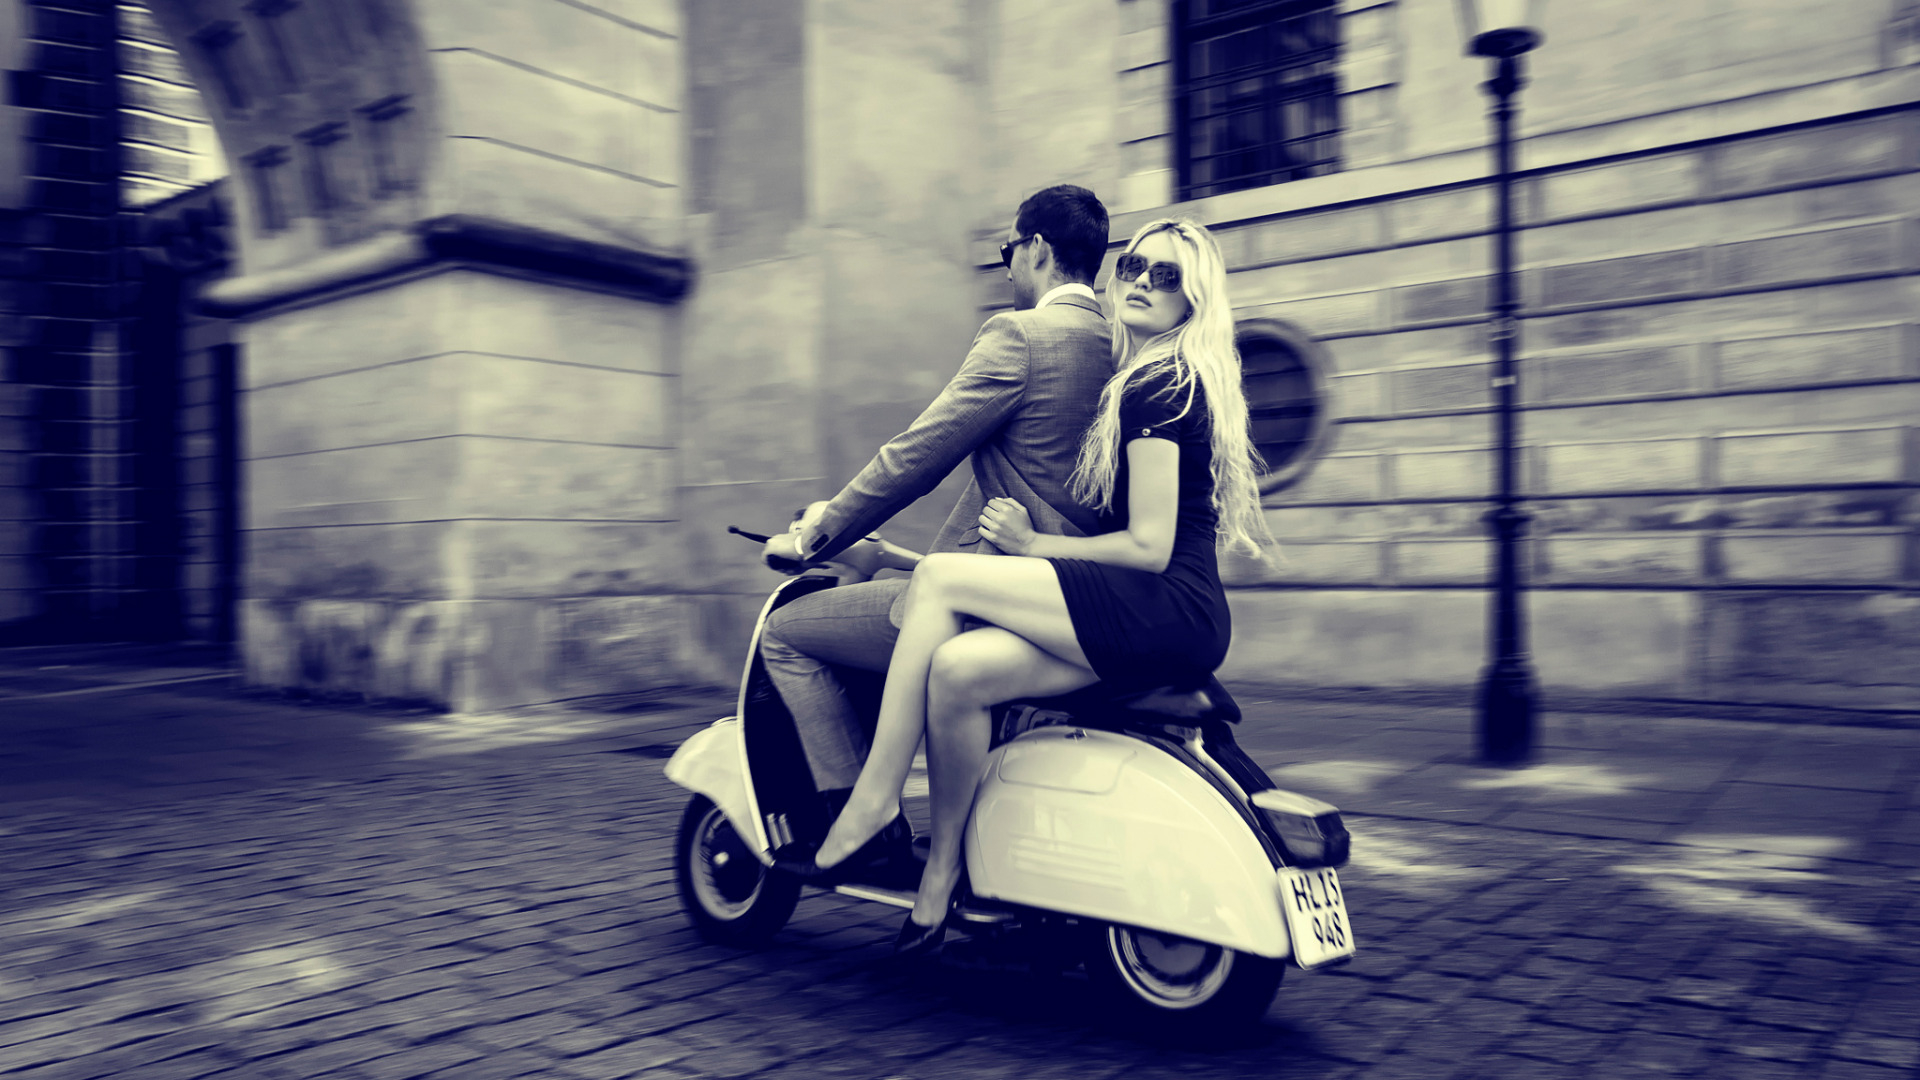 1920x1080 Download wallpaper girl, the city, guy, vintage, retro, vespa, scooter, section style in resoluti